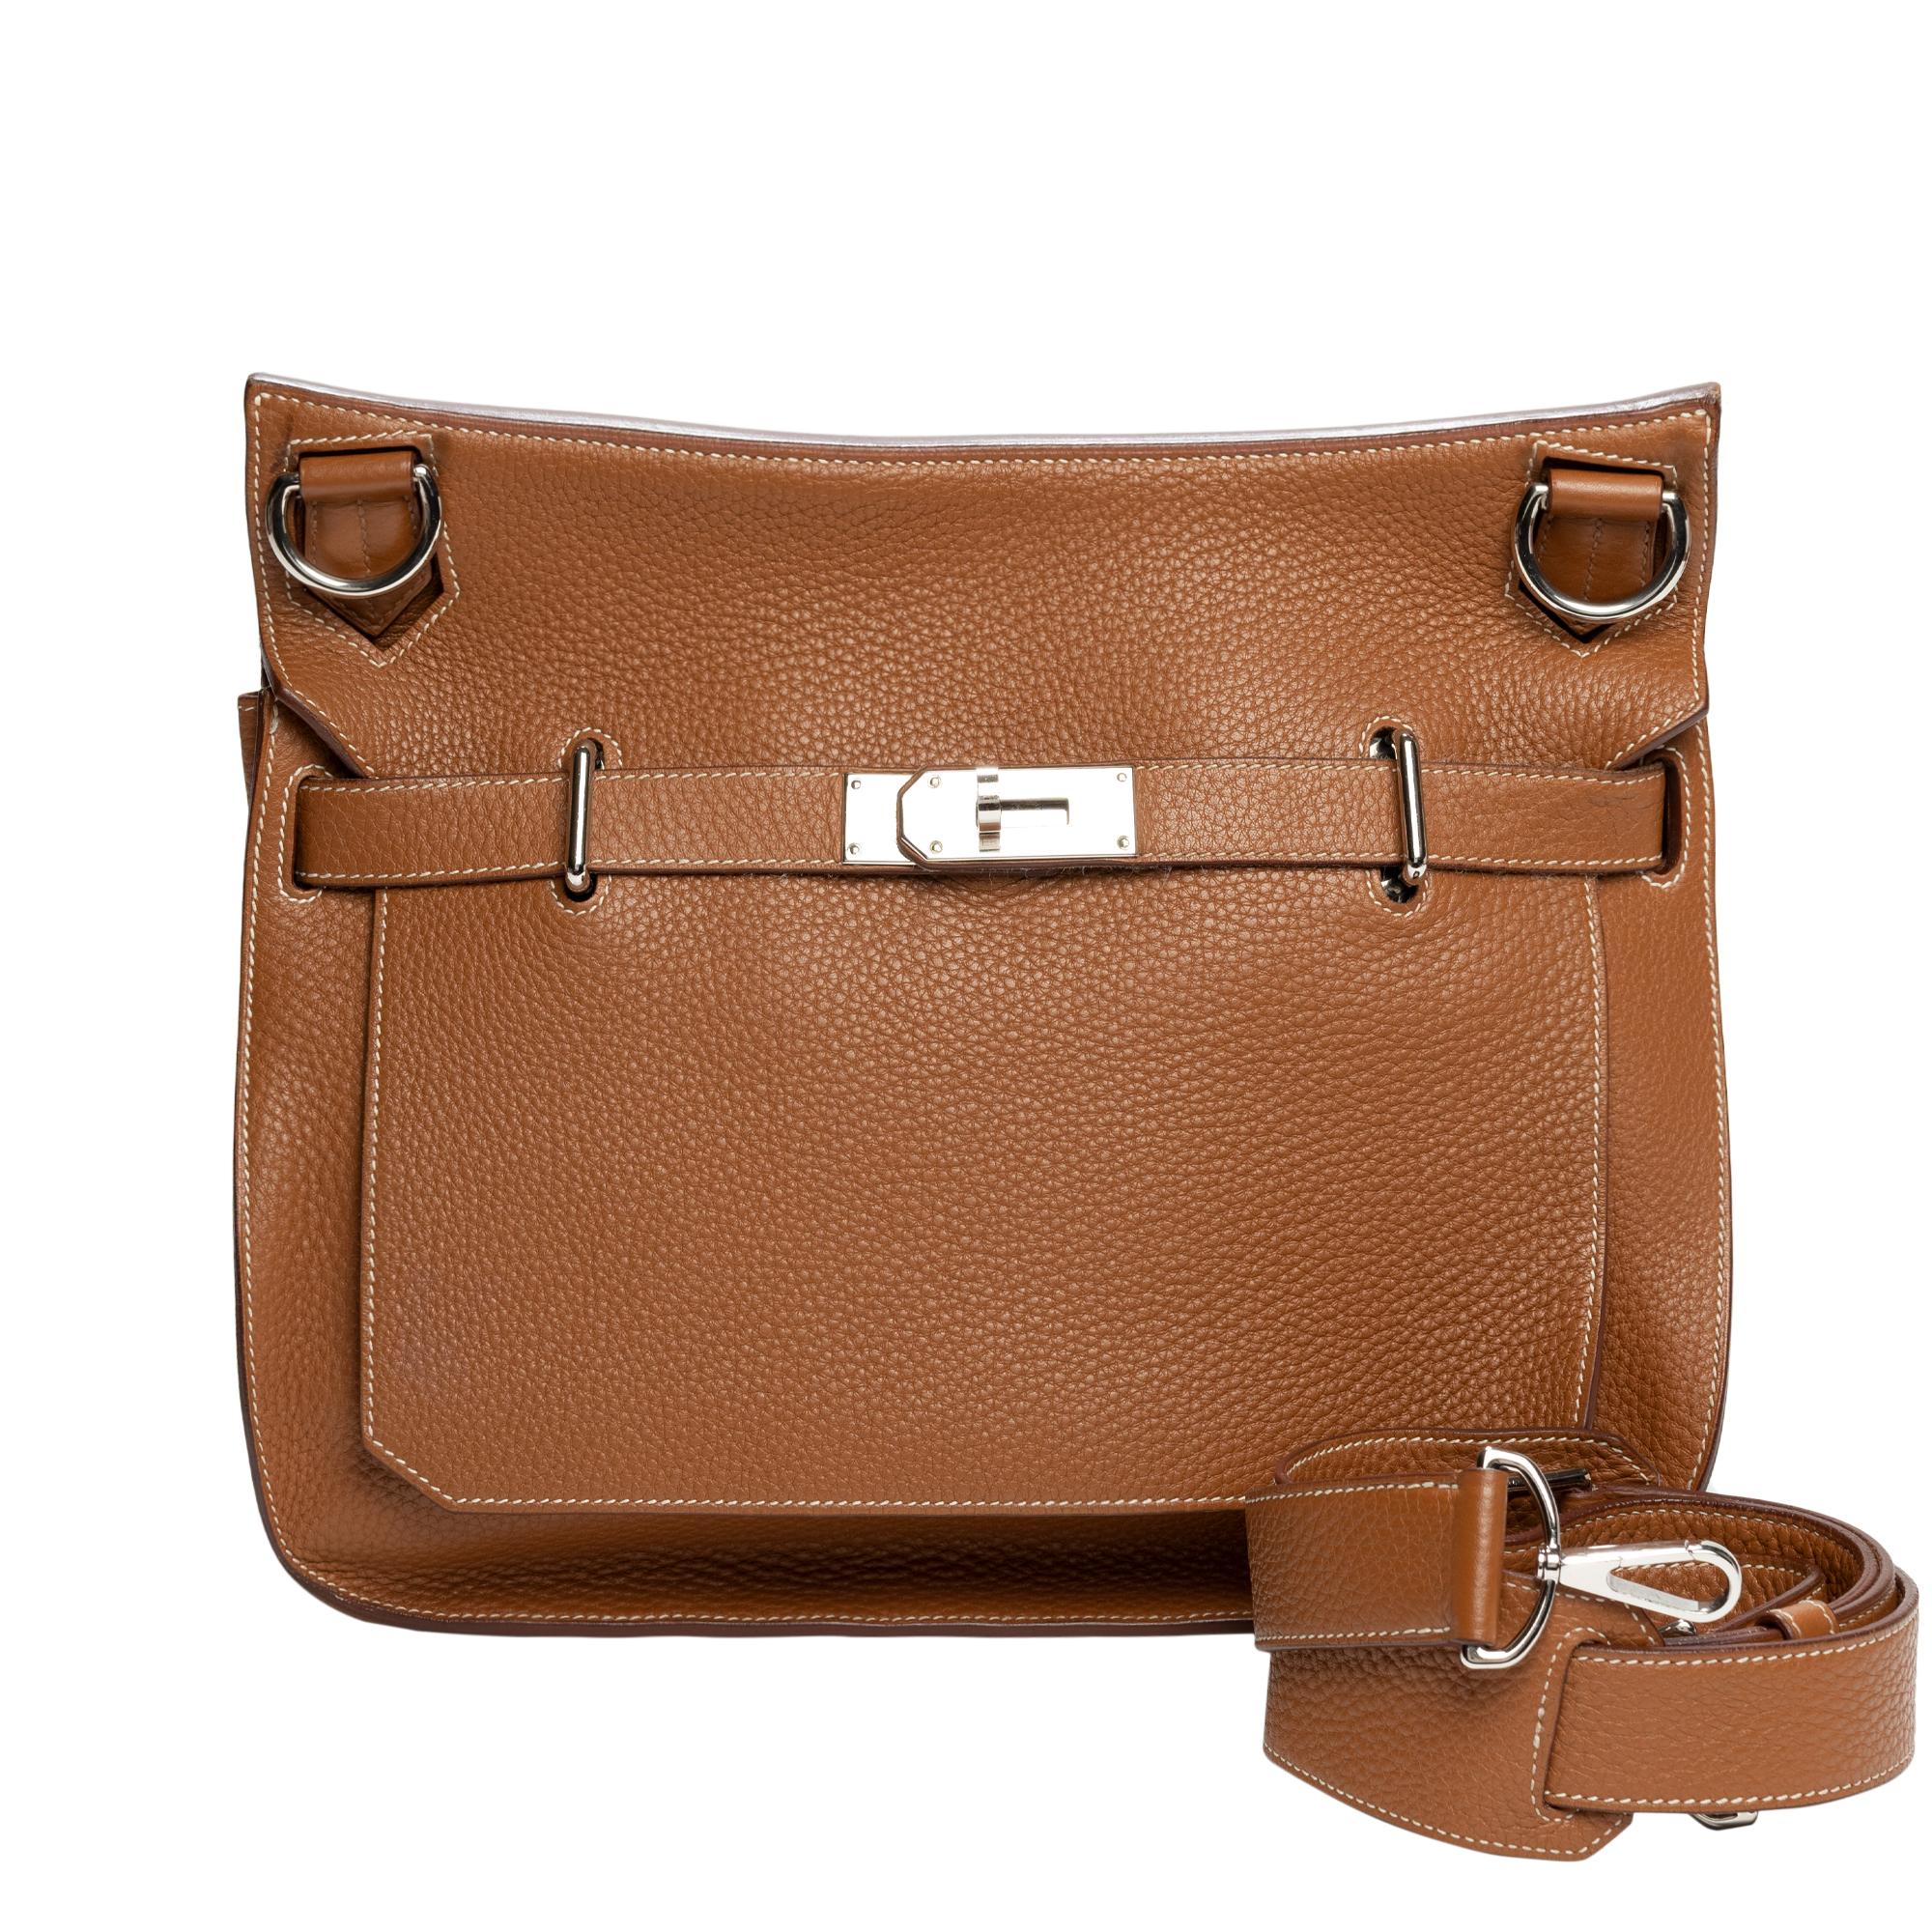 This Hermes Jypsiere Handbag GM Clemence 35, crafted in Gold Clemence leather, features a long adjustable strap and palladium hardware. Its front flap with the turn-lock closure opens to a gold leather interior with slip and zip pockets. 
Date